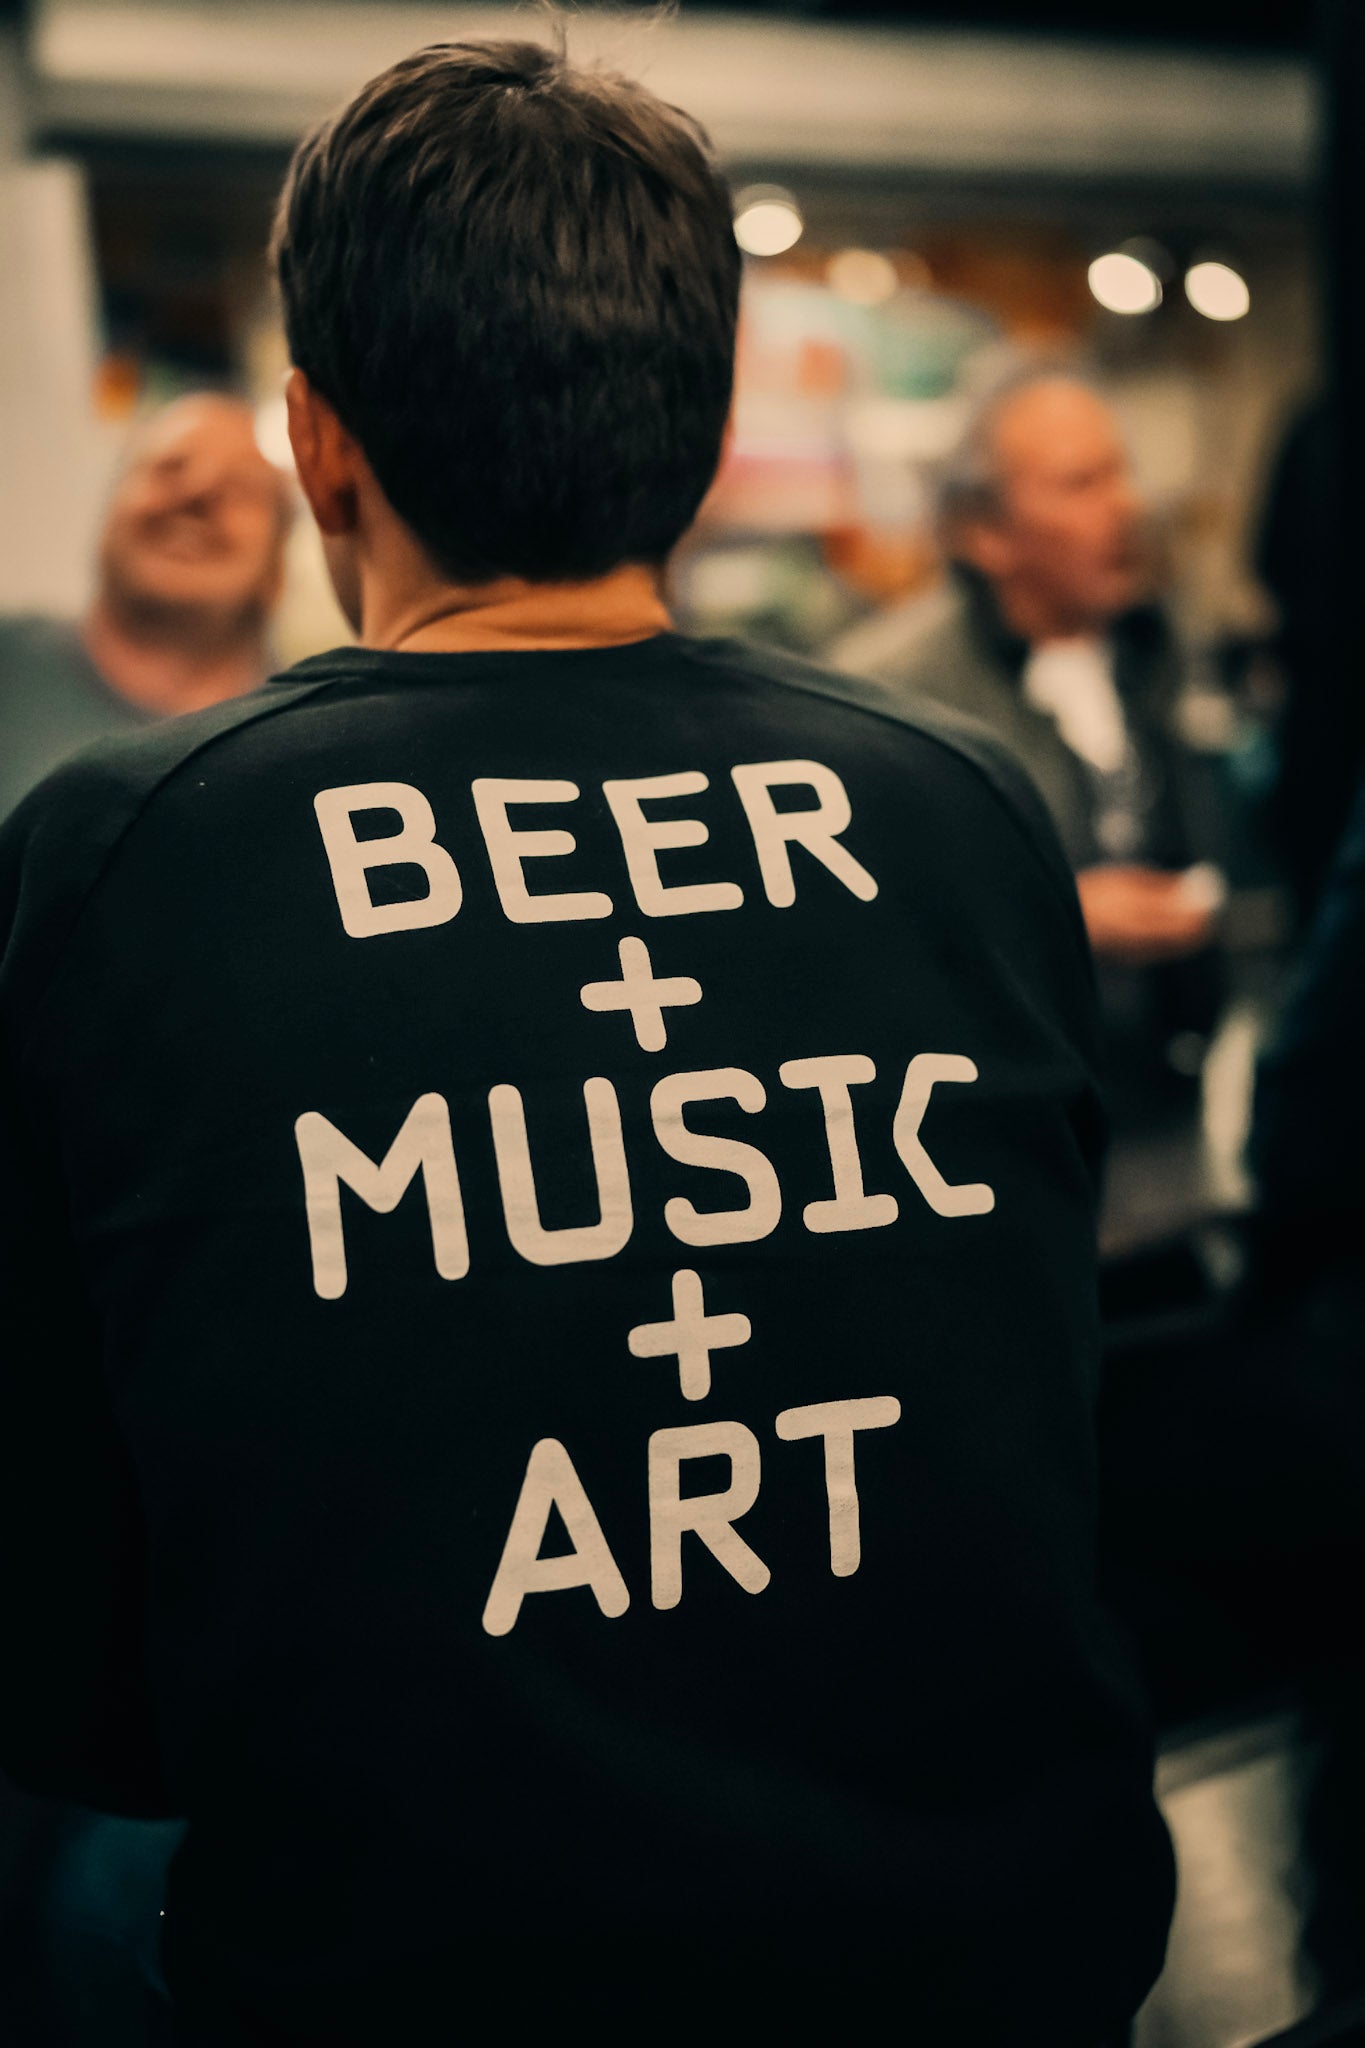 BEER + MUSIC + ART > Why is it so important in the Two Tribes culture?